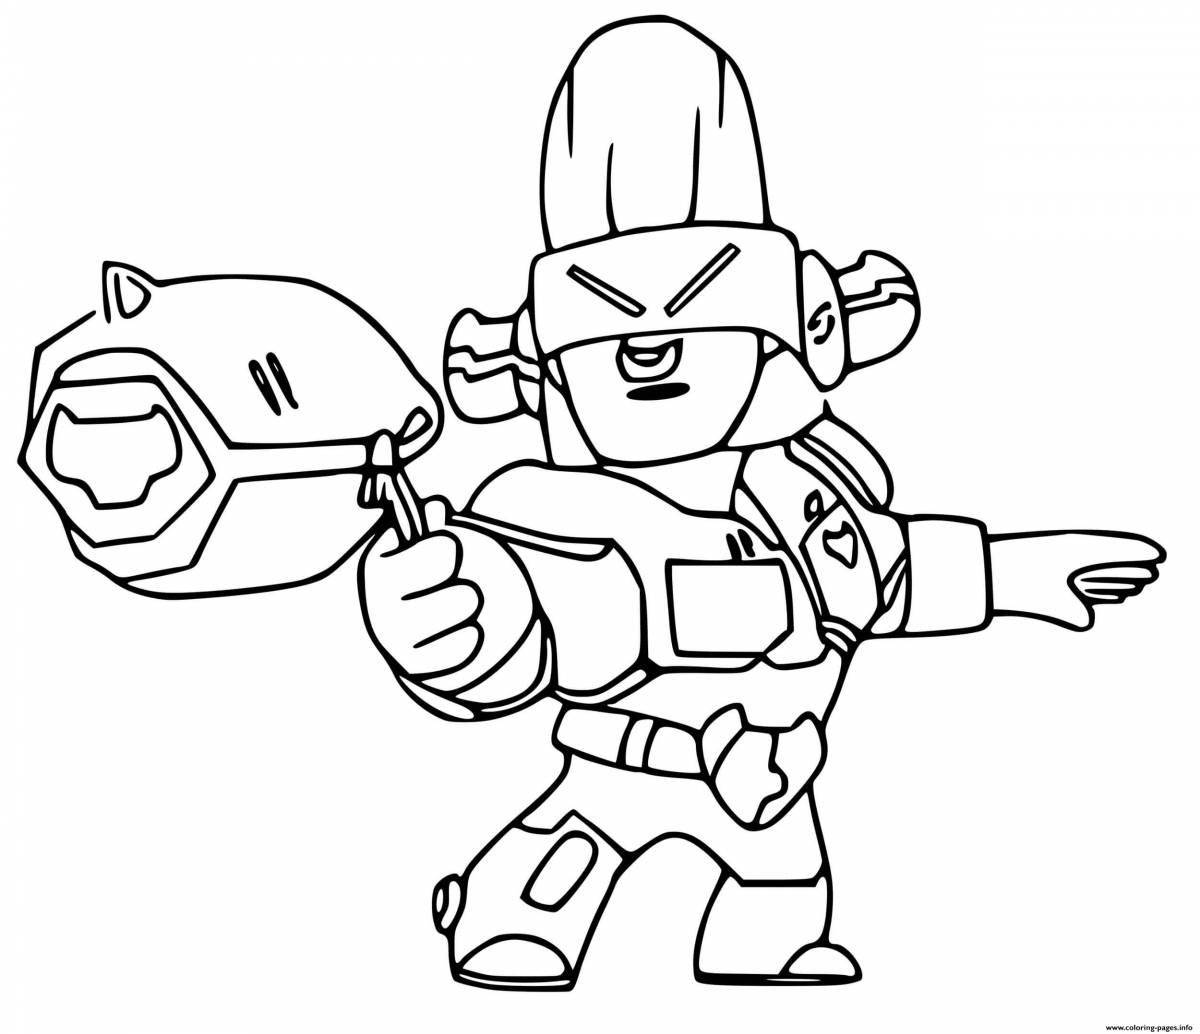 Amazing coloring pages brawl stars buzz